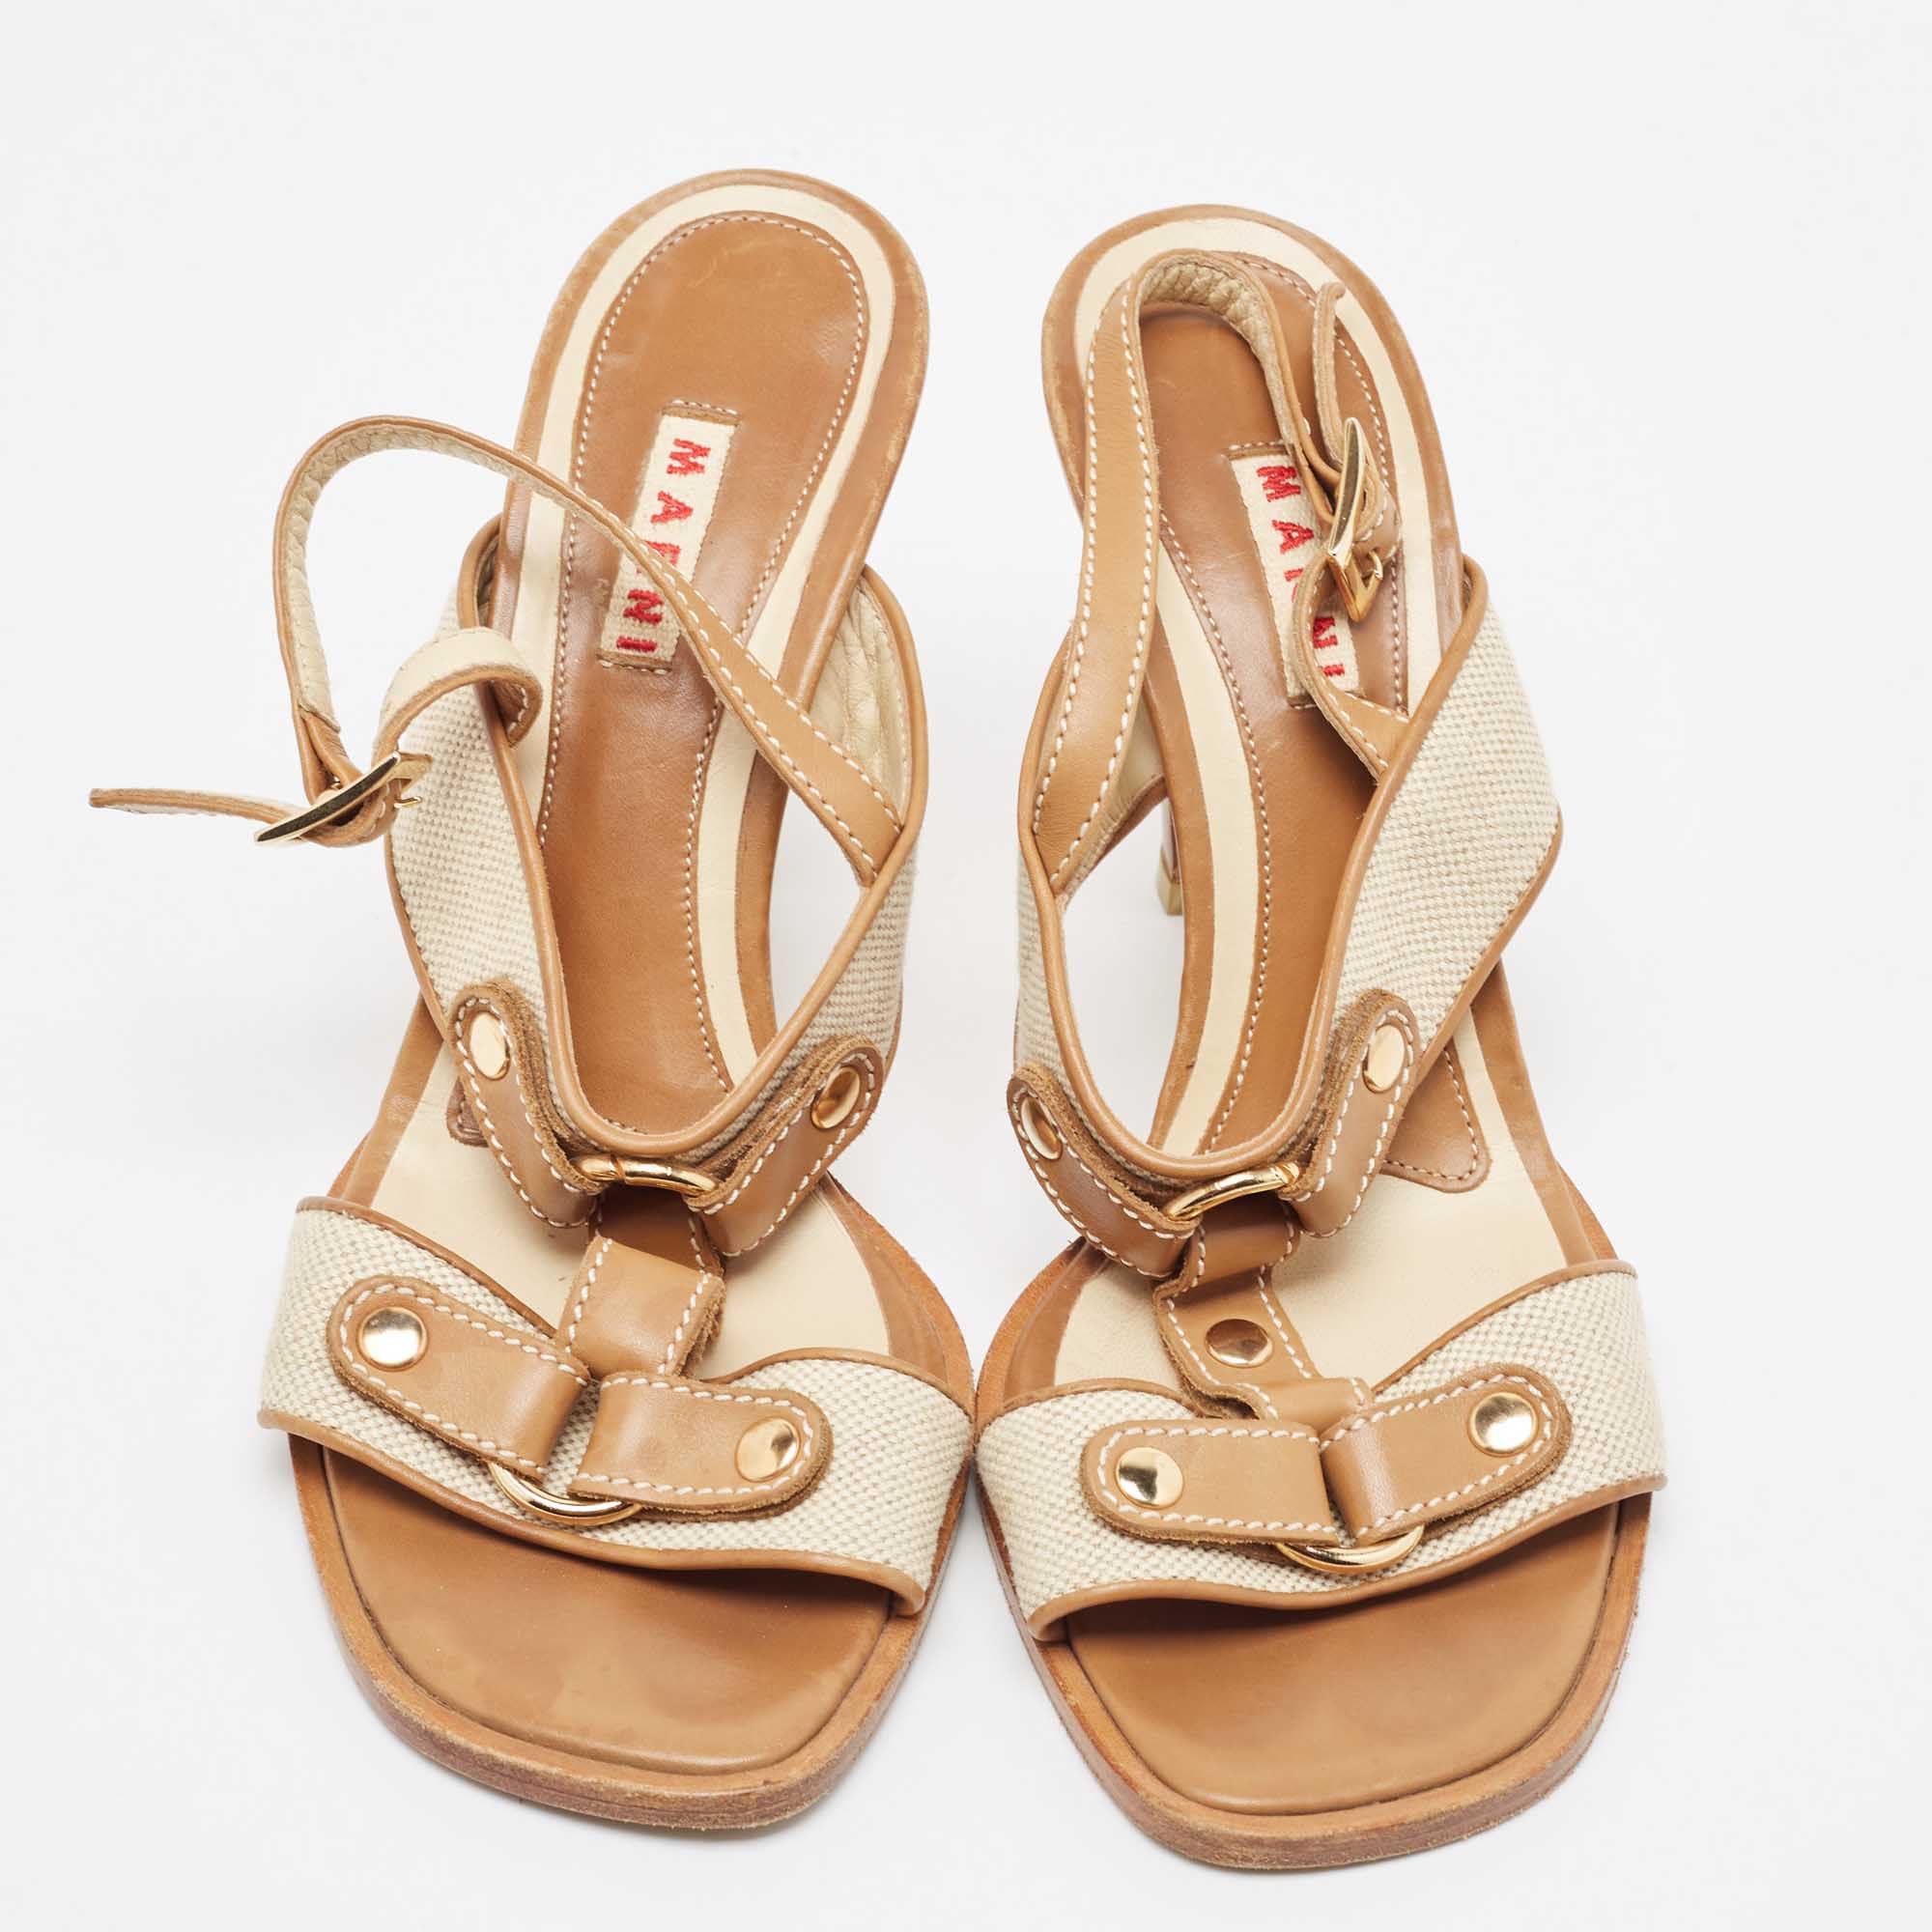 Marni Tan/Off-White Canvas And Leather T-Strap Sandals Size 39